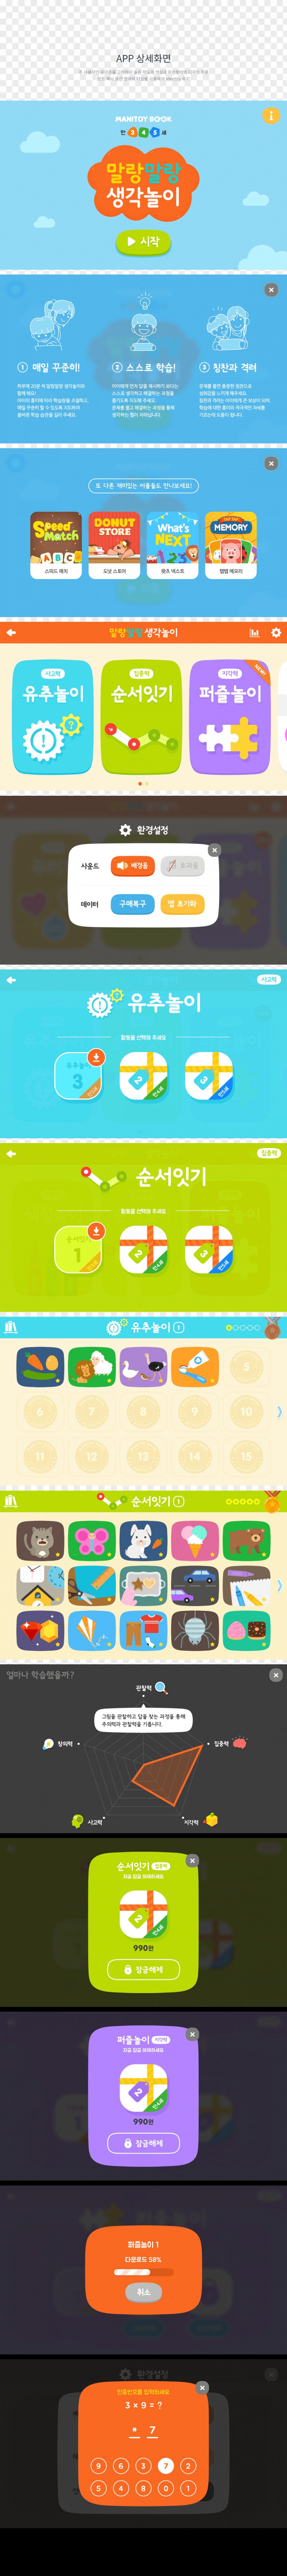 Design (주)레이어랩 User Interface Graphic Material PNG